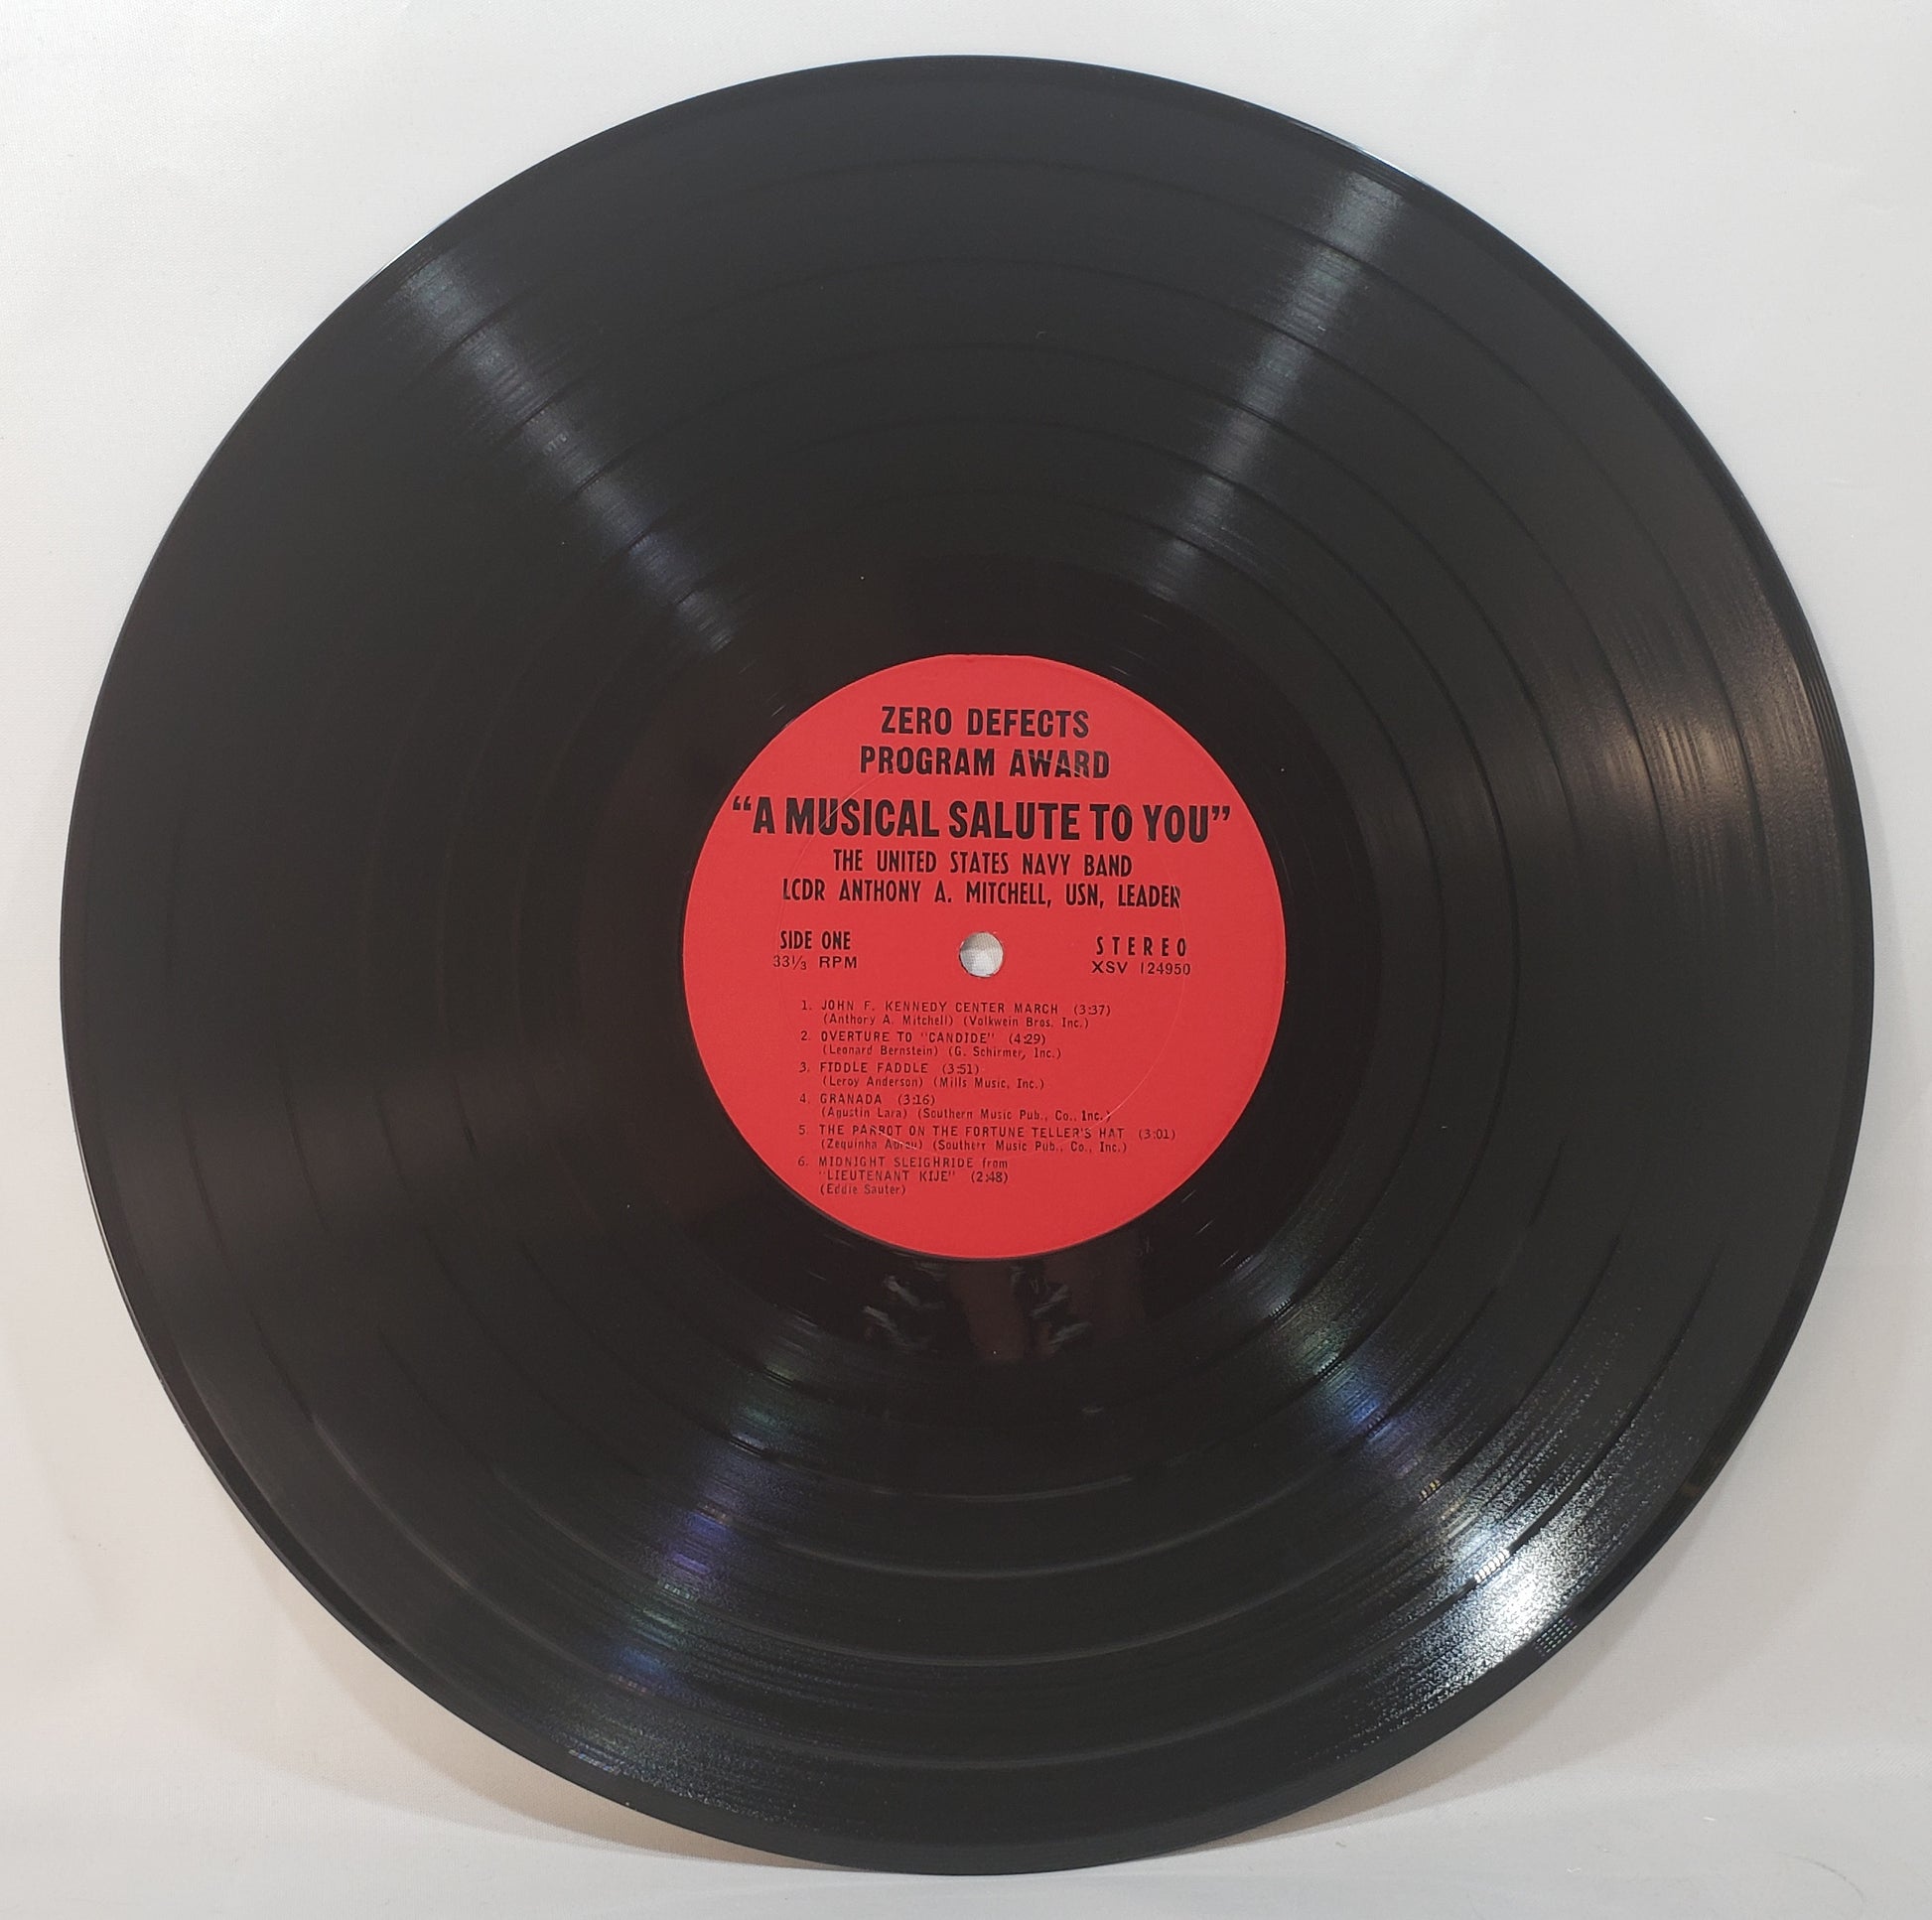 The United States Navy Band - A Musical Salute to You [Used Vinyl Record LP]